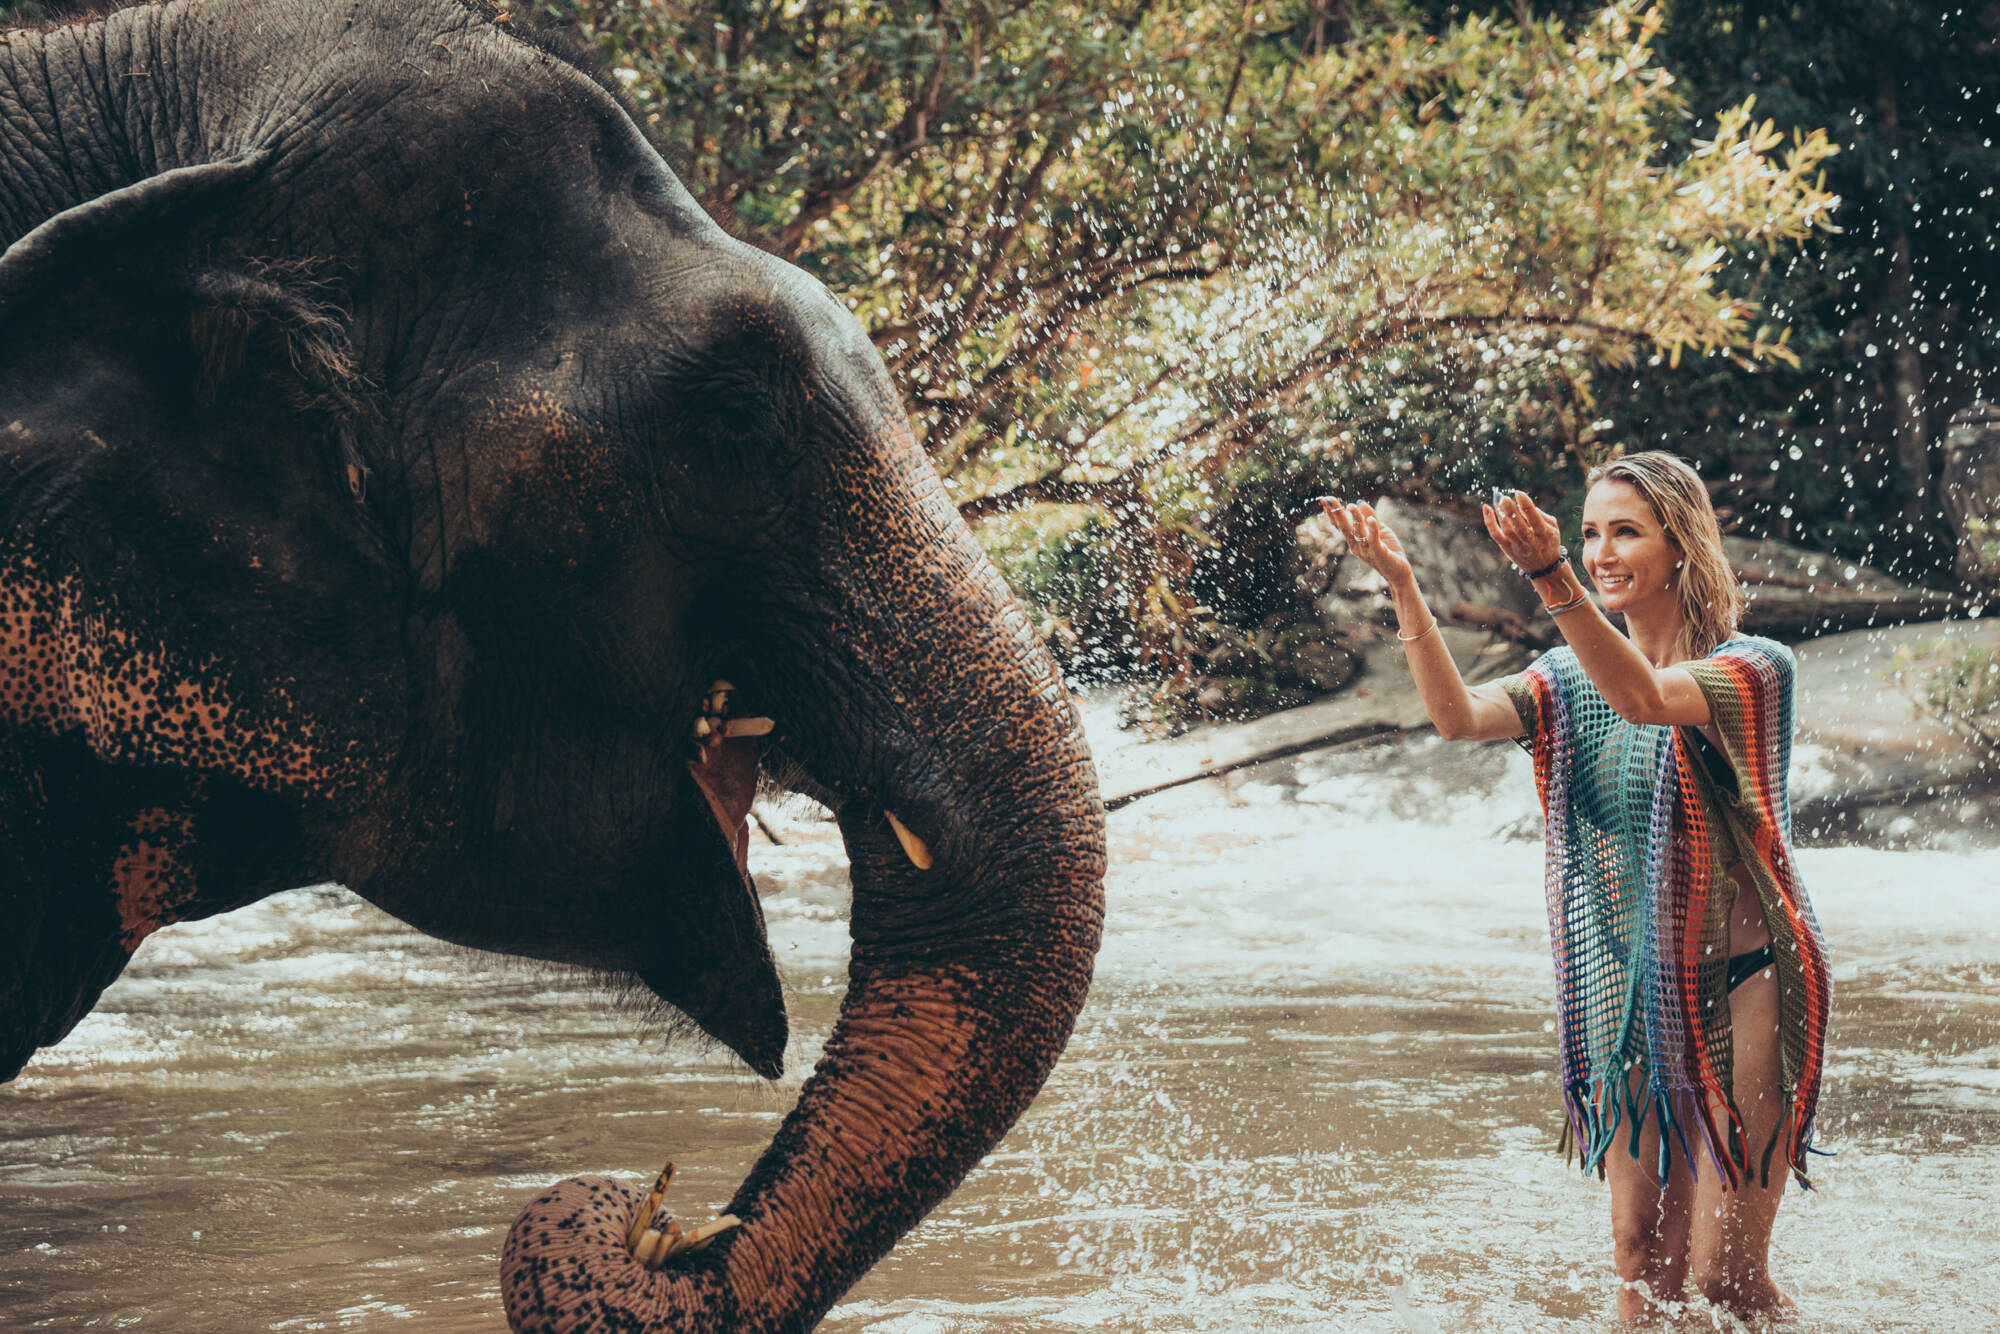 Meeting an elephant in the river